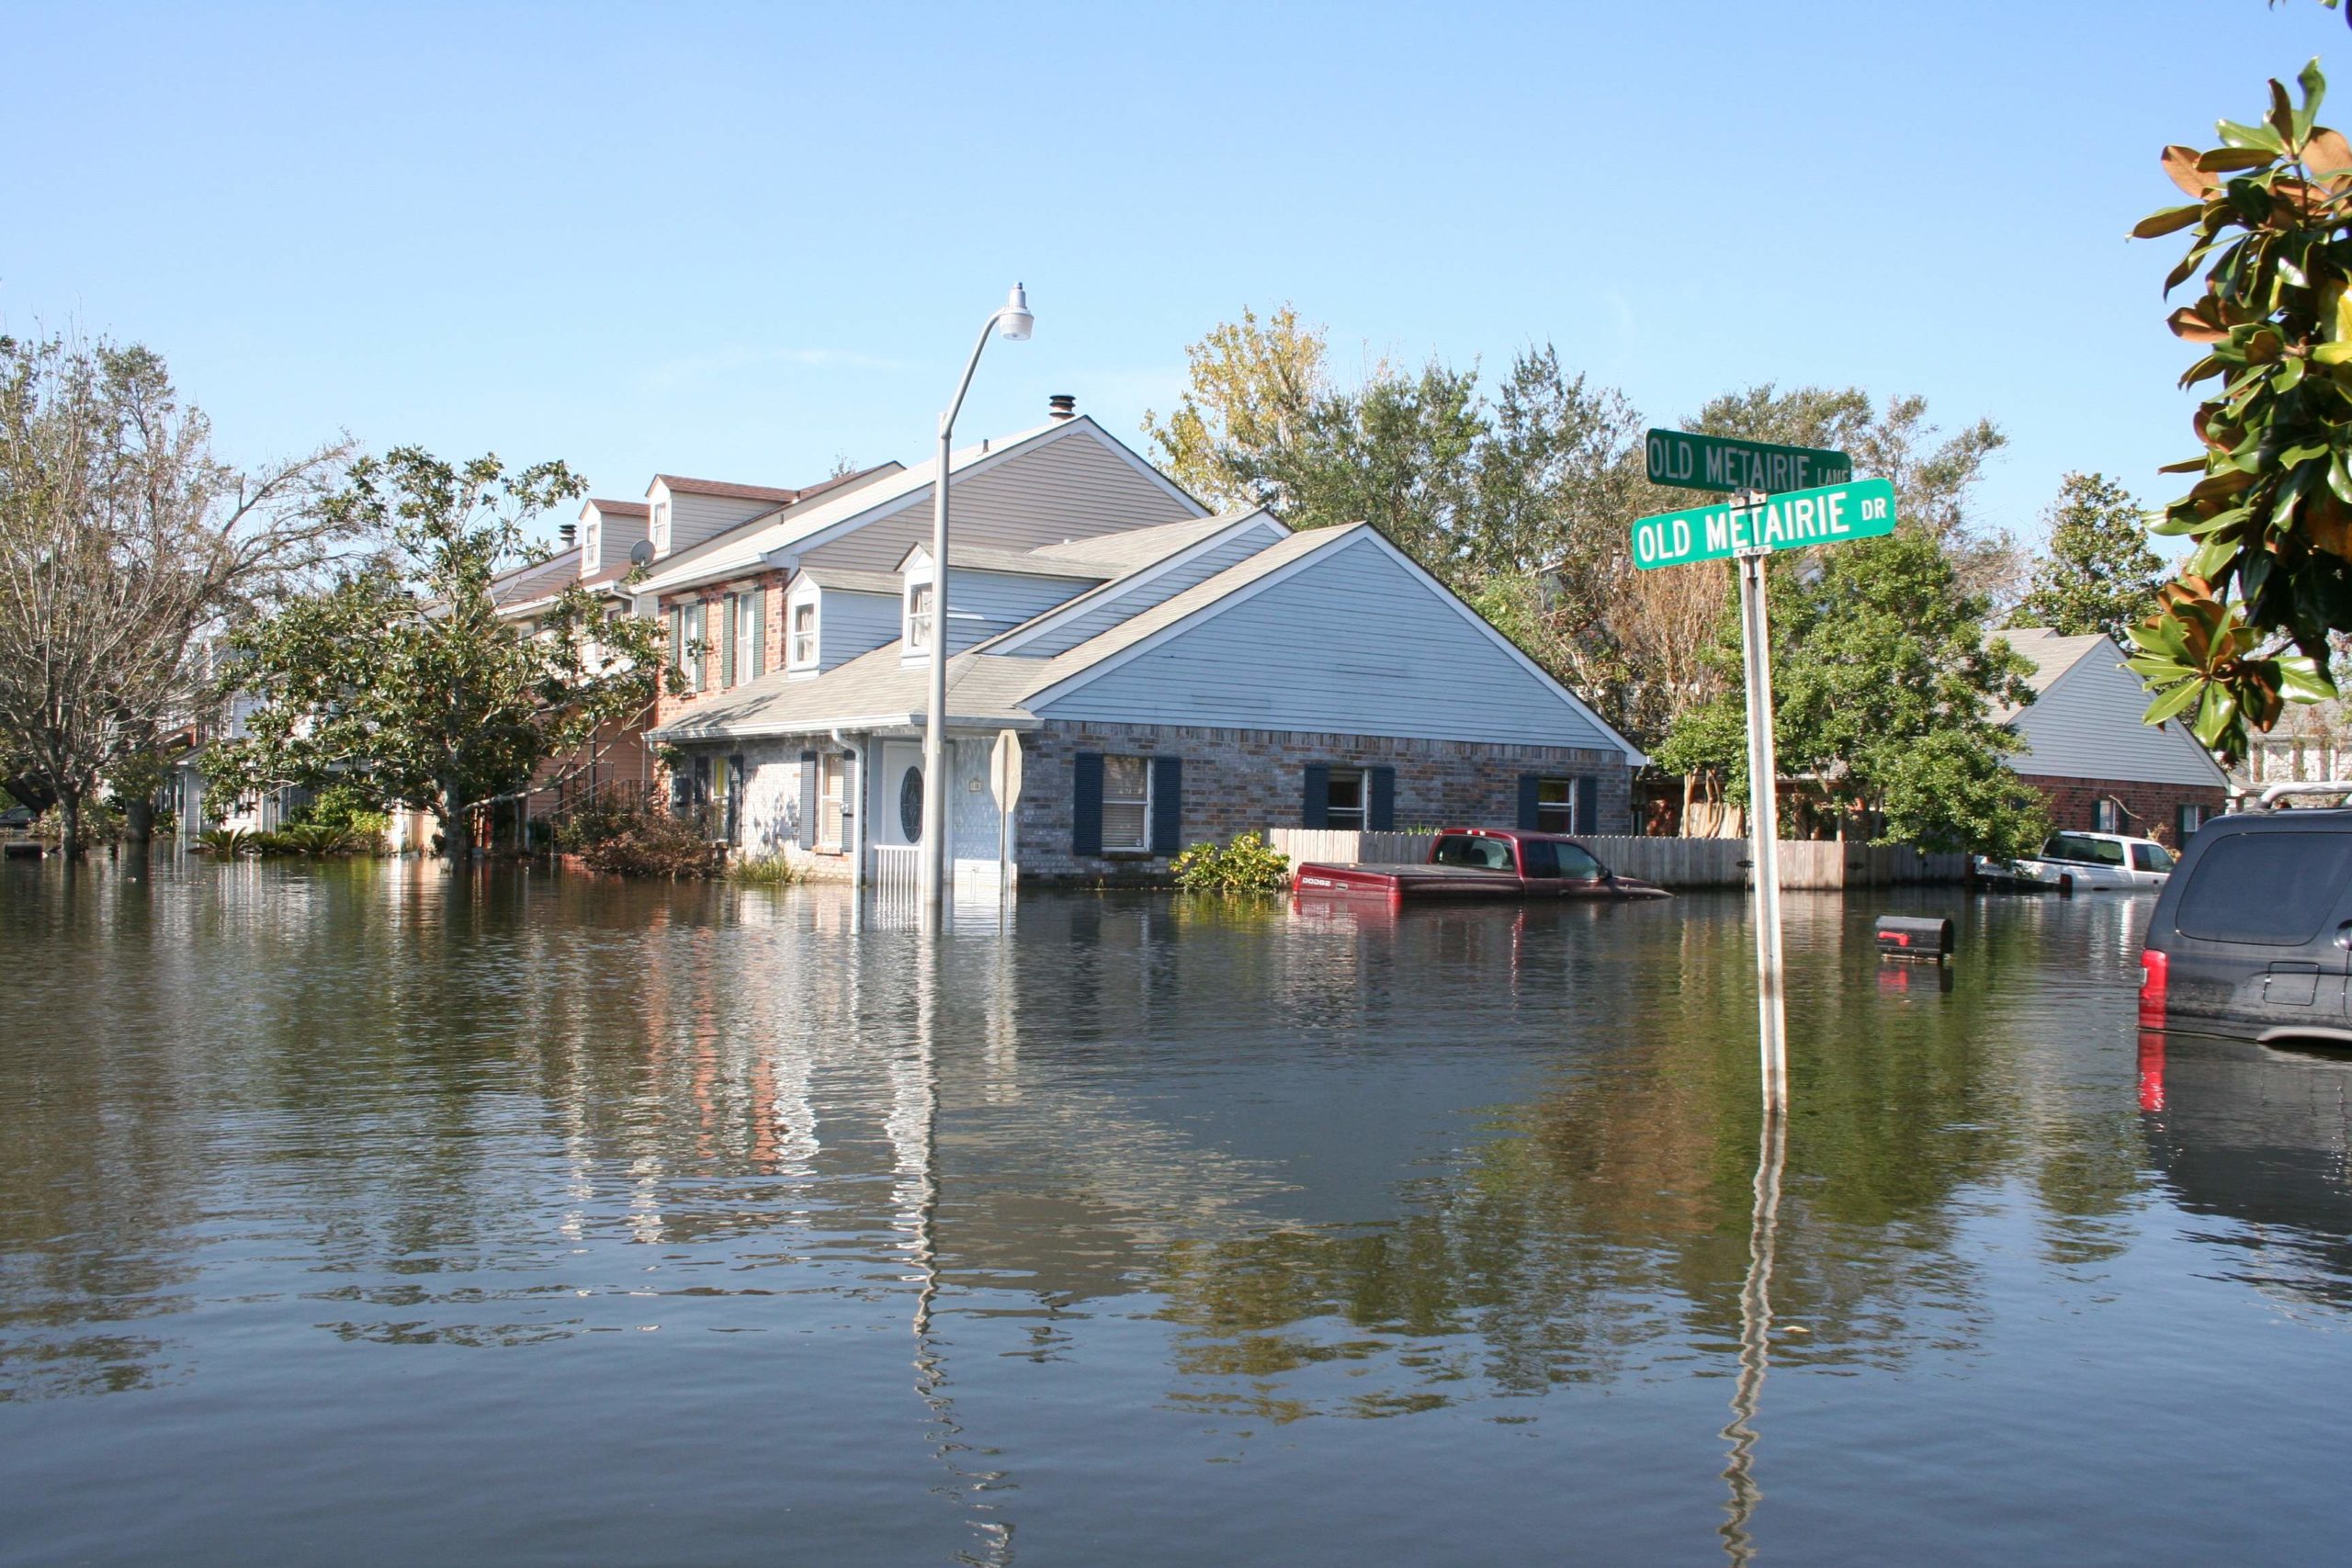 What Water Damage Does Homeowners Insurance Not Cover?